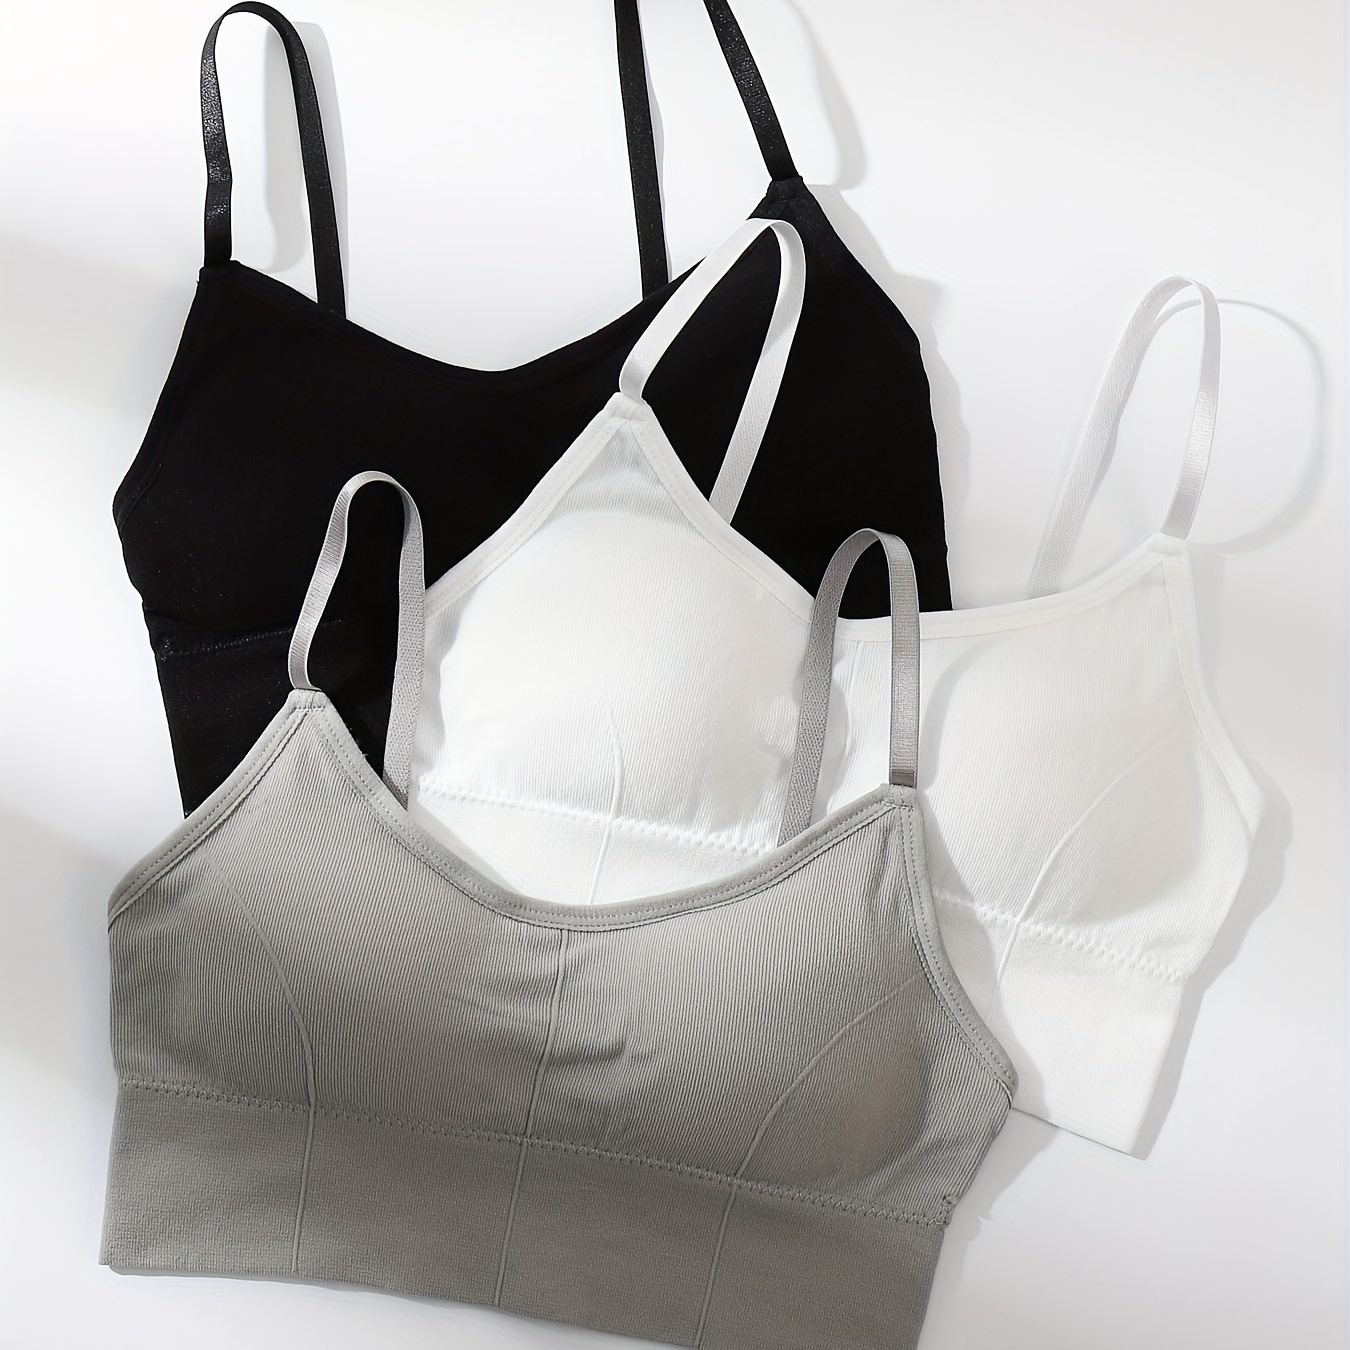 

3pcs Simple Solid Cami Tops, Soft & Comfy All-match Crop Top, Women's Lingerie & Underwear